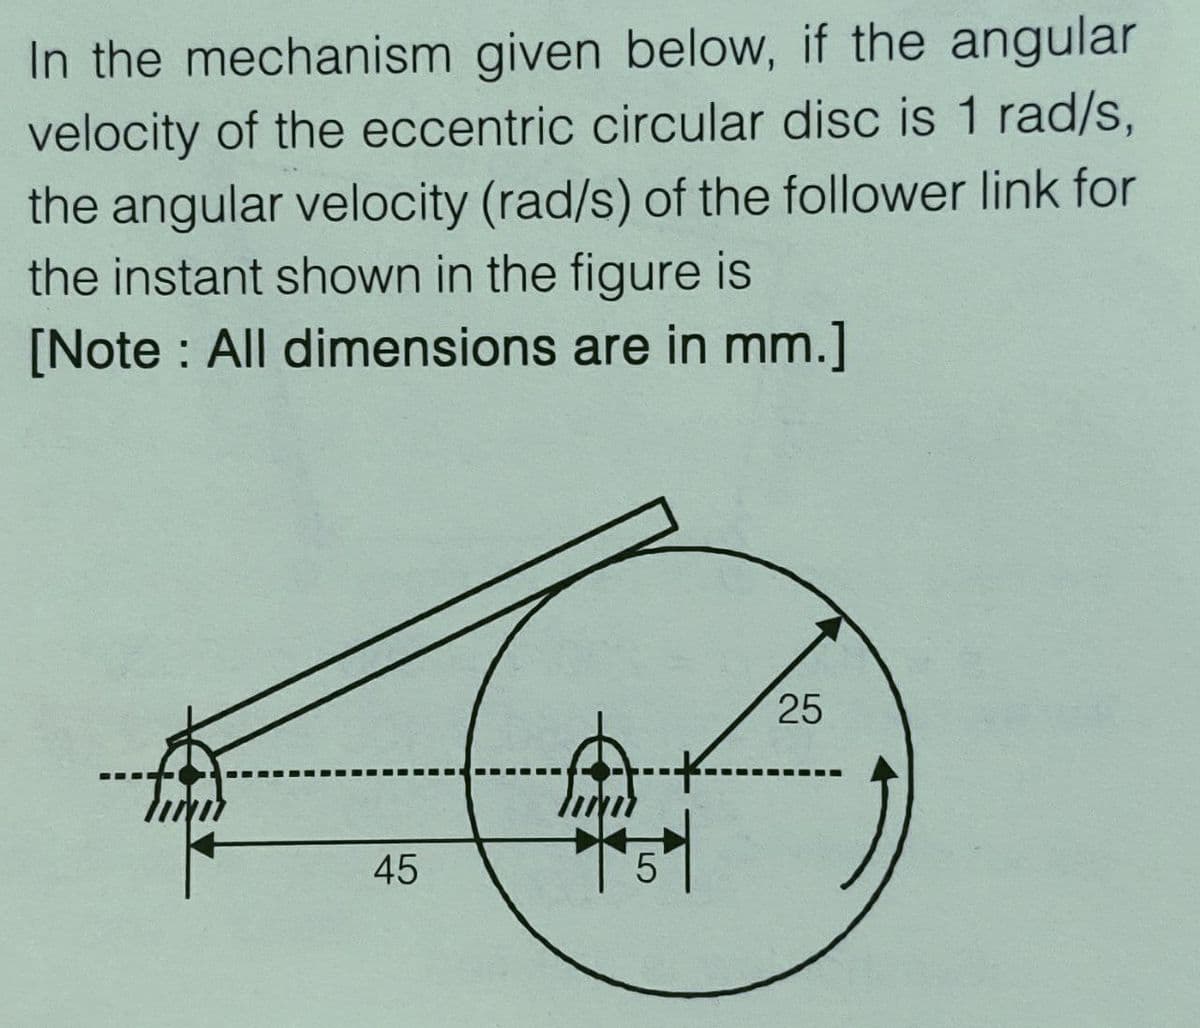 In the mechanism given below, if the angular
velocity of the eccentric circular disc is 1 rad/s,
the angular velocity (rad/s) of the follower link for
the instant shown in the figure is
[Note : All dimensions are in mm.]
25
45
5
